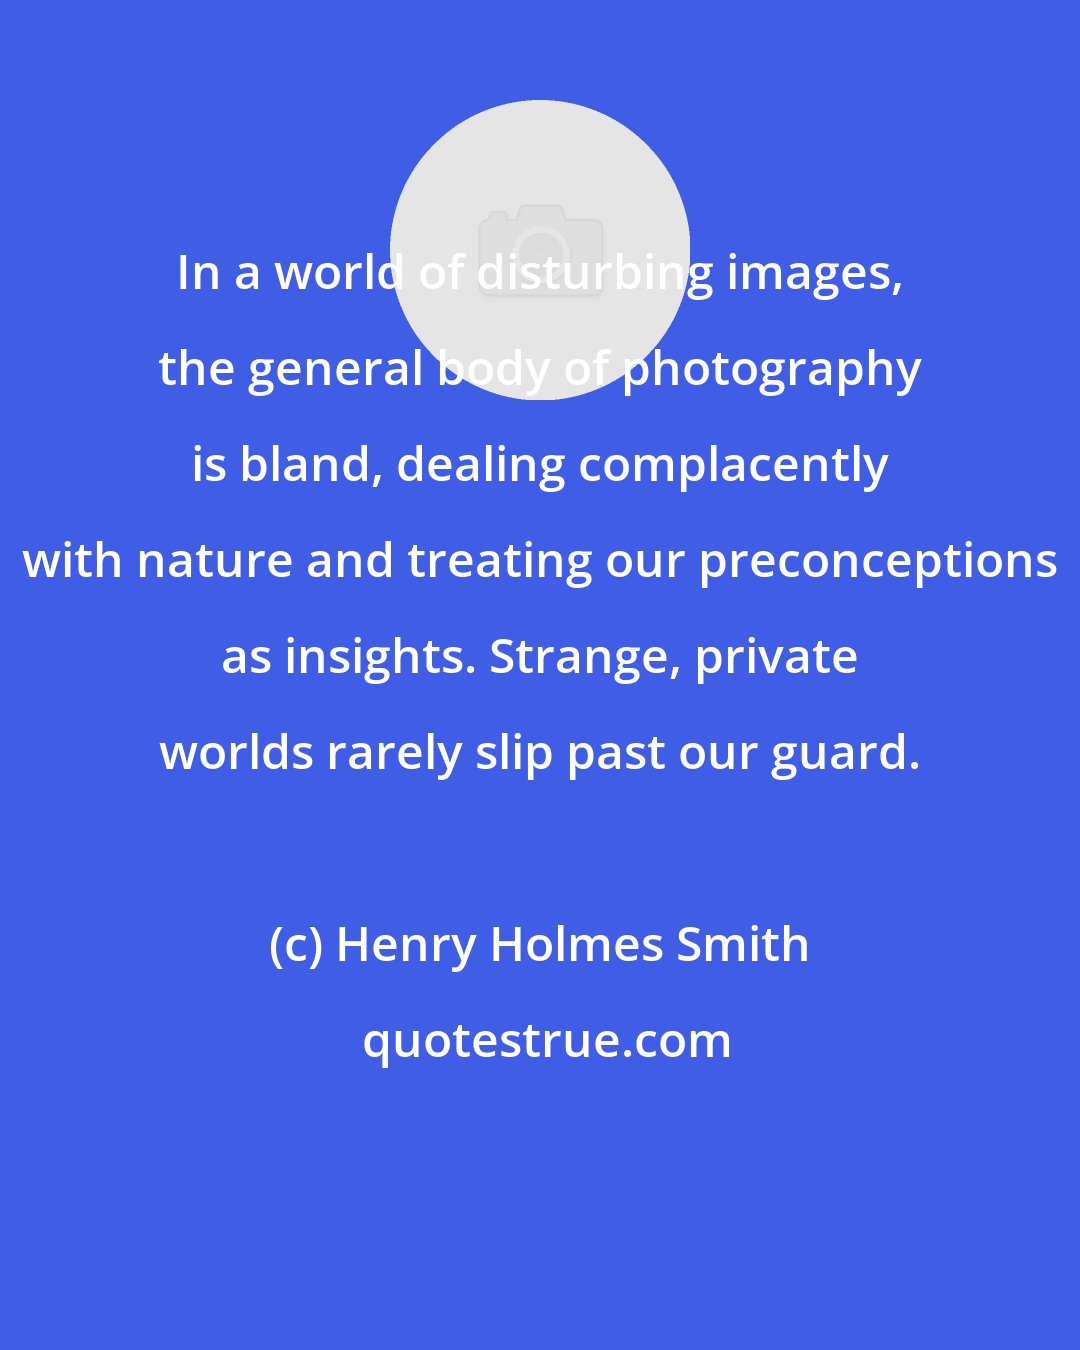 Henry Holmes Smith: In a world of disturbing images, the general body of photography is bland, dealing complacently with nature and treating our preconceptions as insights. Strange, private worlds rarely slip past our guard.